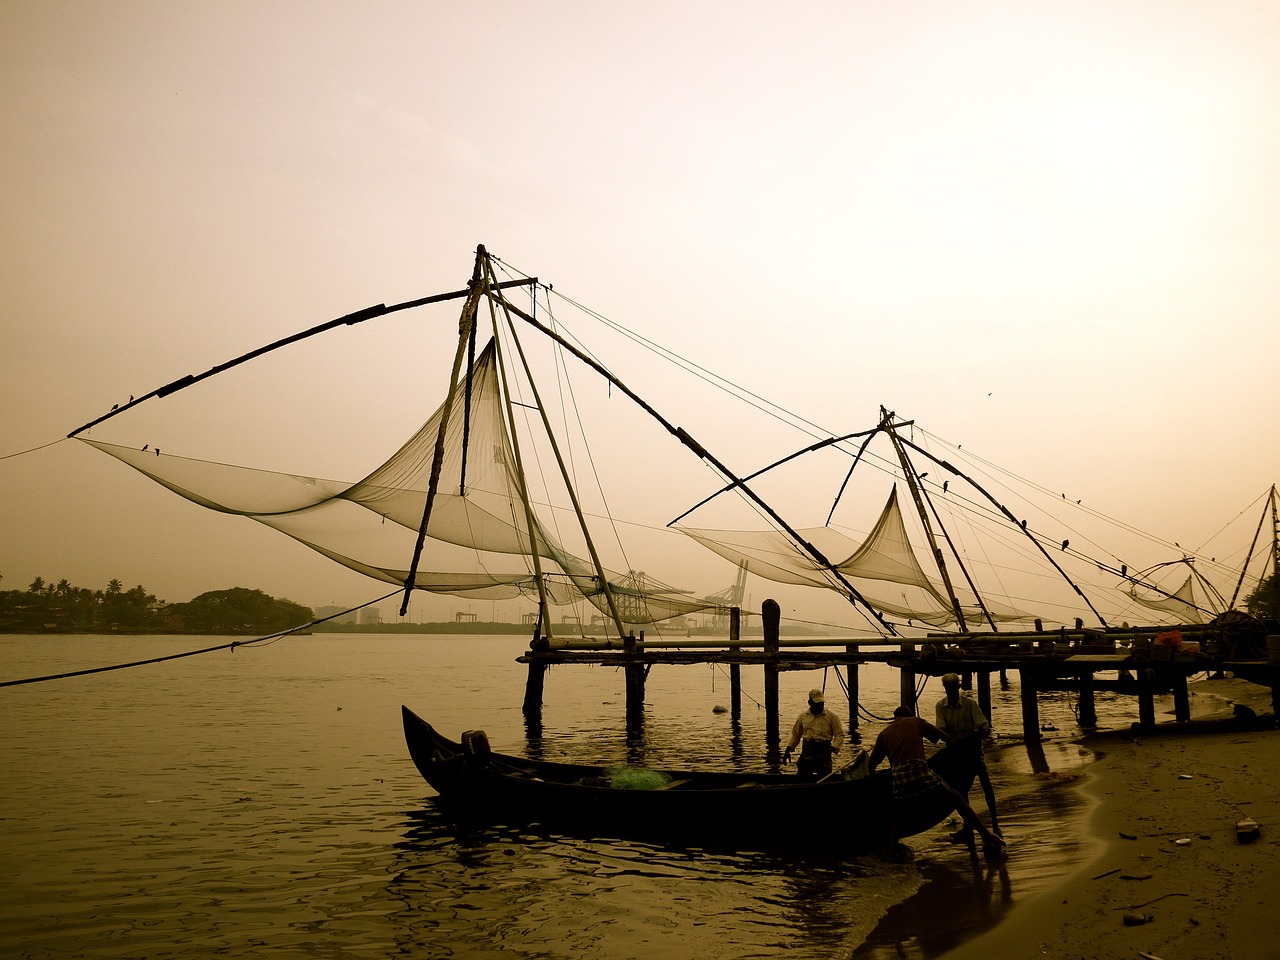 5-Day Cultural and Culinary Journey through Kochi, Munnar, and Alleppey